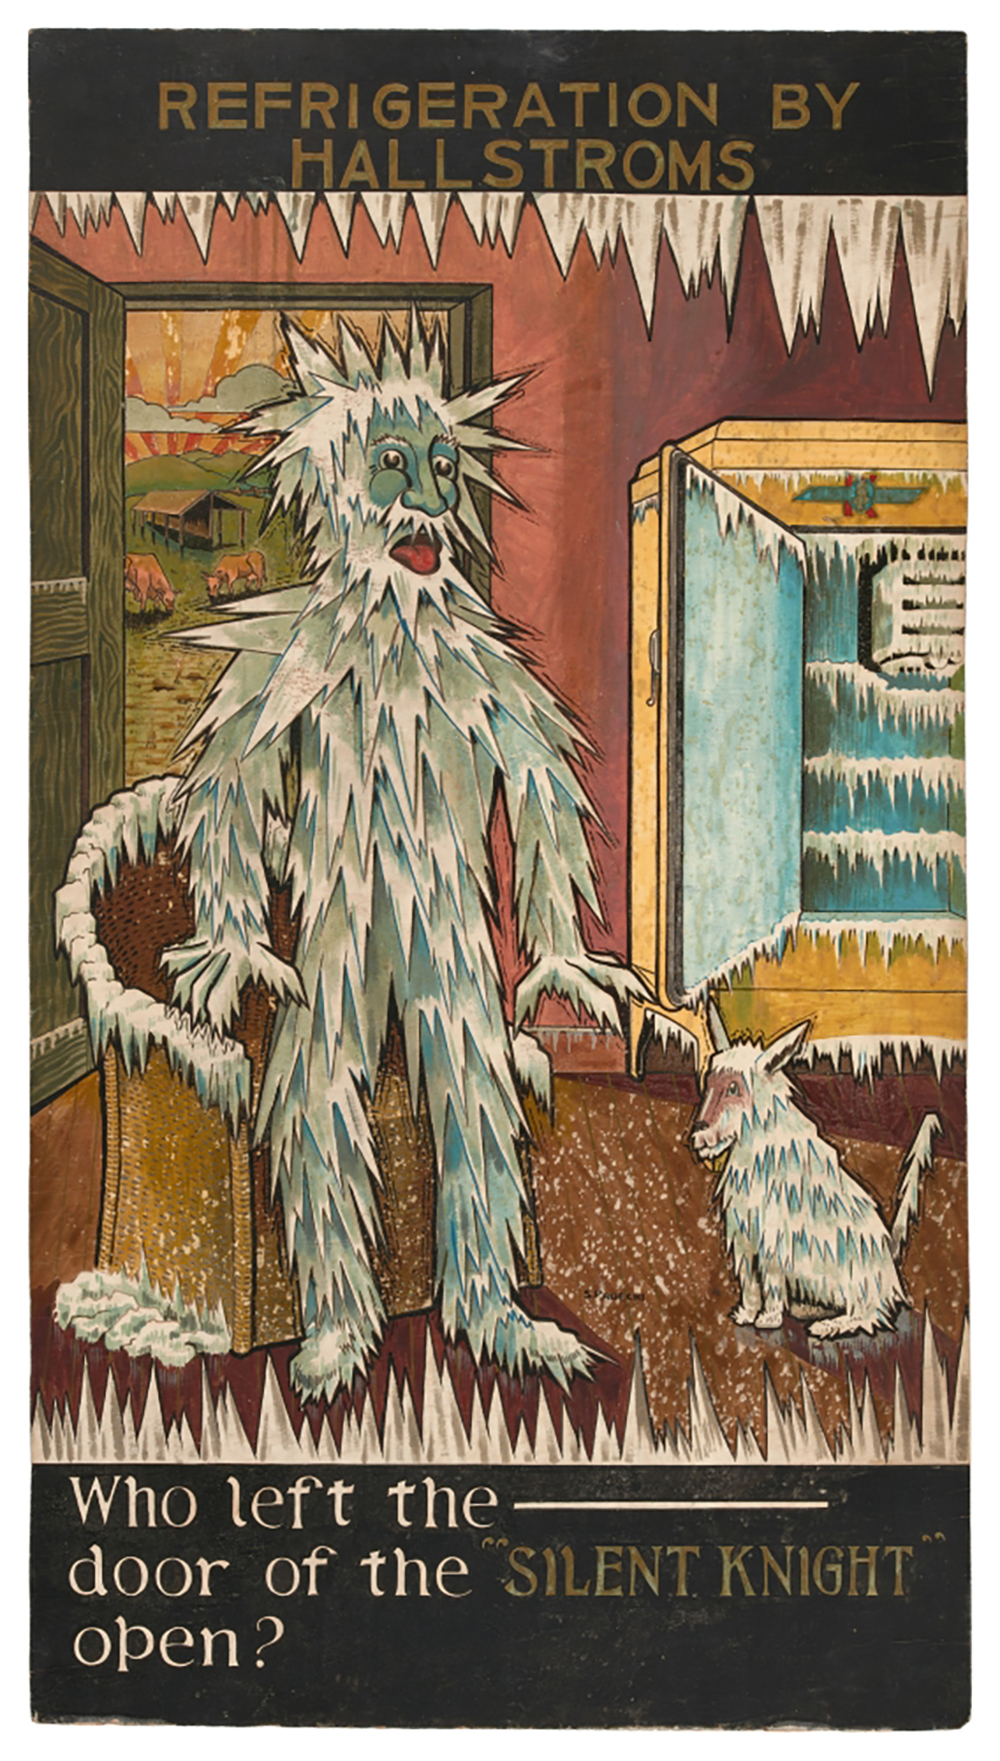 Image 2 of 5 - Image of a cartoon sign with a man and a dog covered in icicles. The sign also has icicles on the chair, the fridge and the edges of the sign. At the top of the sign, it reads ‘REFRIDGERATION BY HALLSTROMS’ and at the bottom ‘Who left the door of the “SILENT KNIGHT” open?’